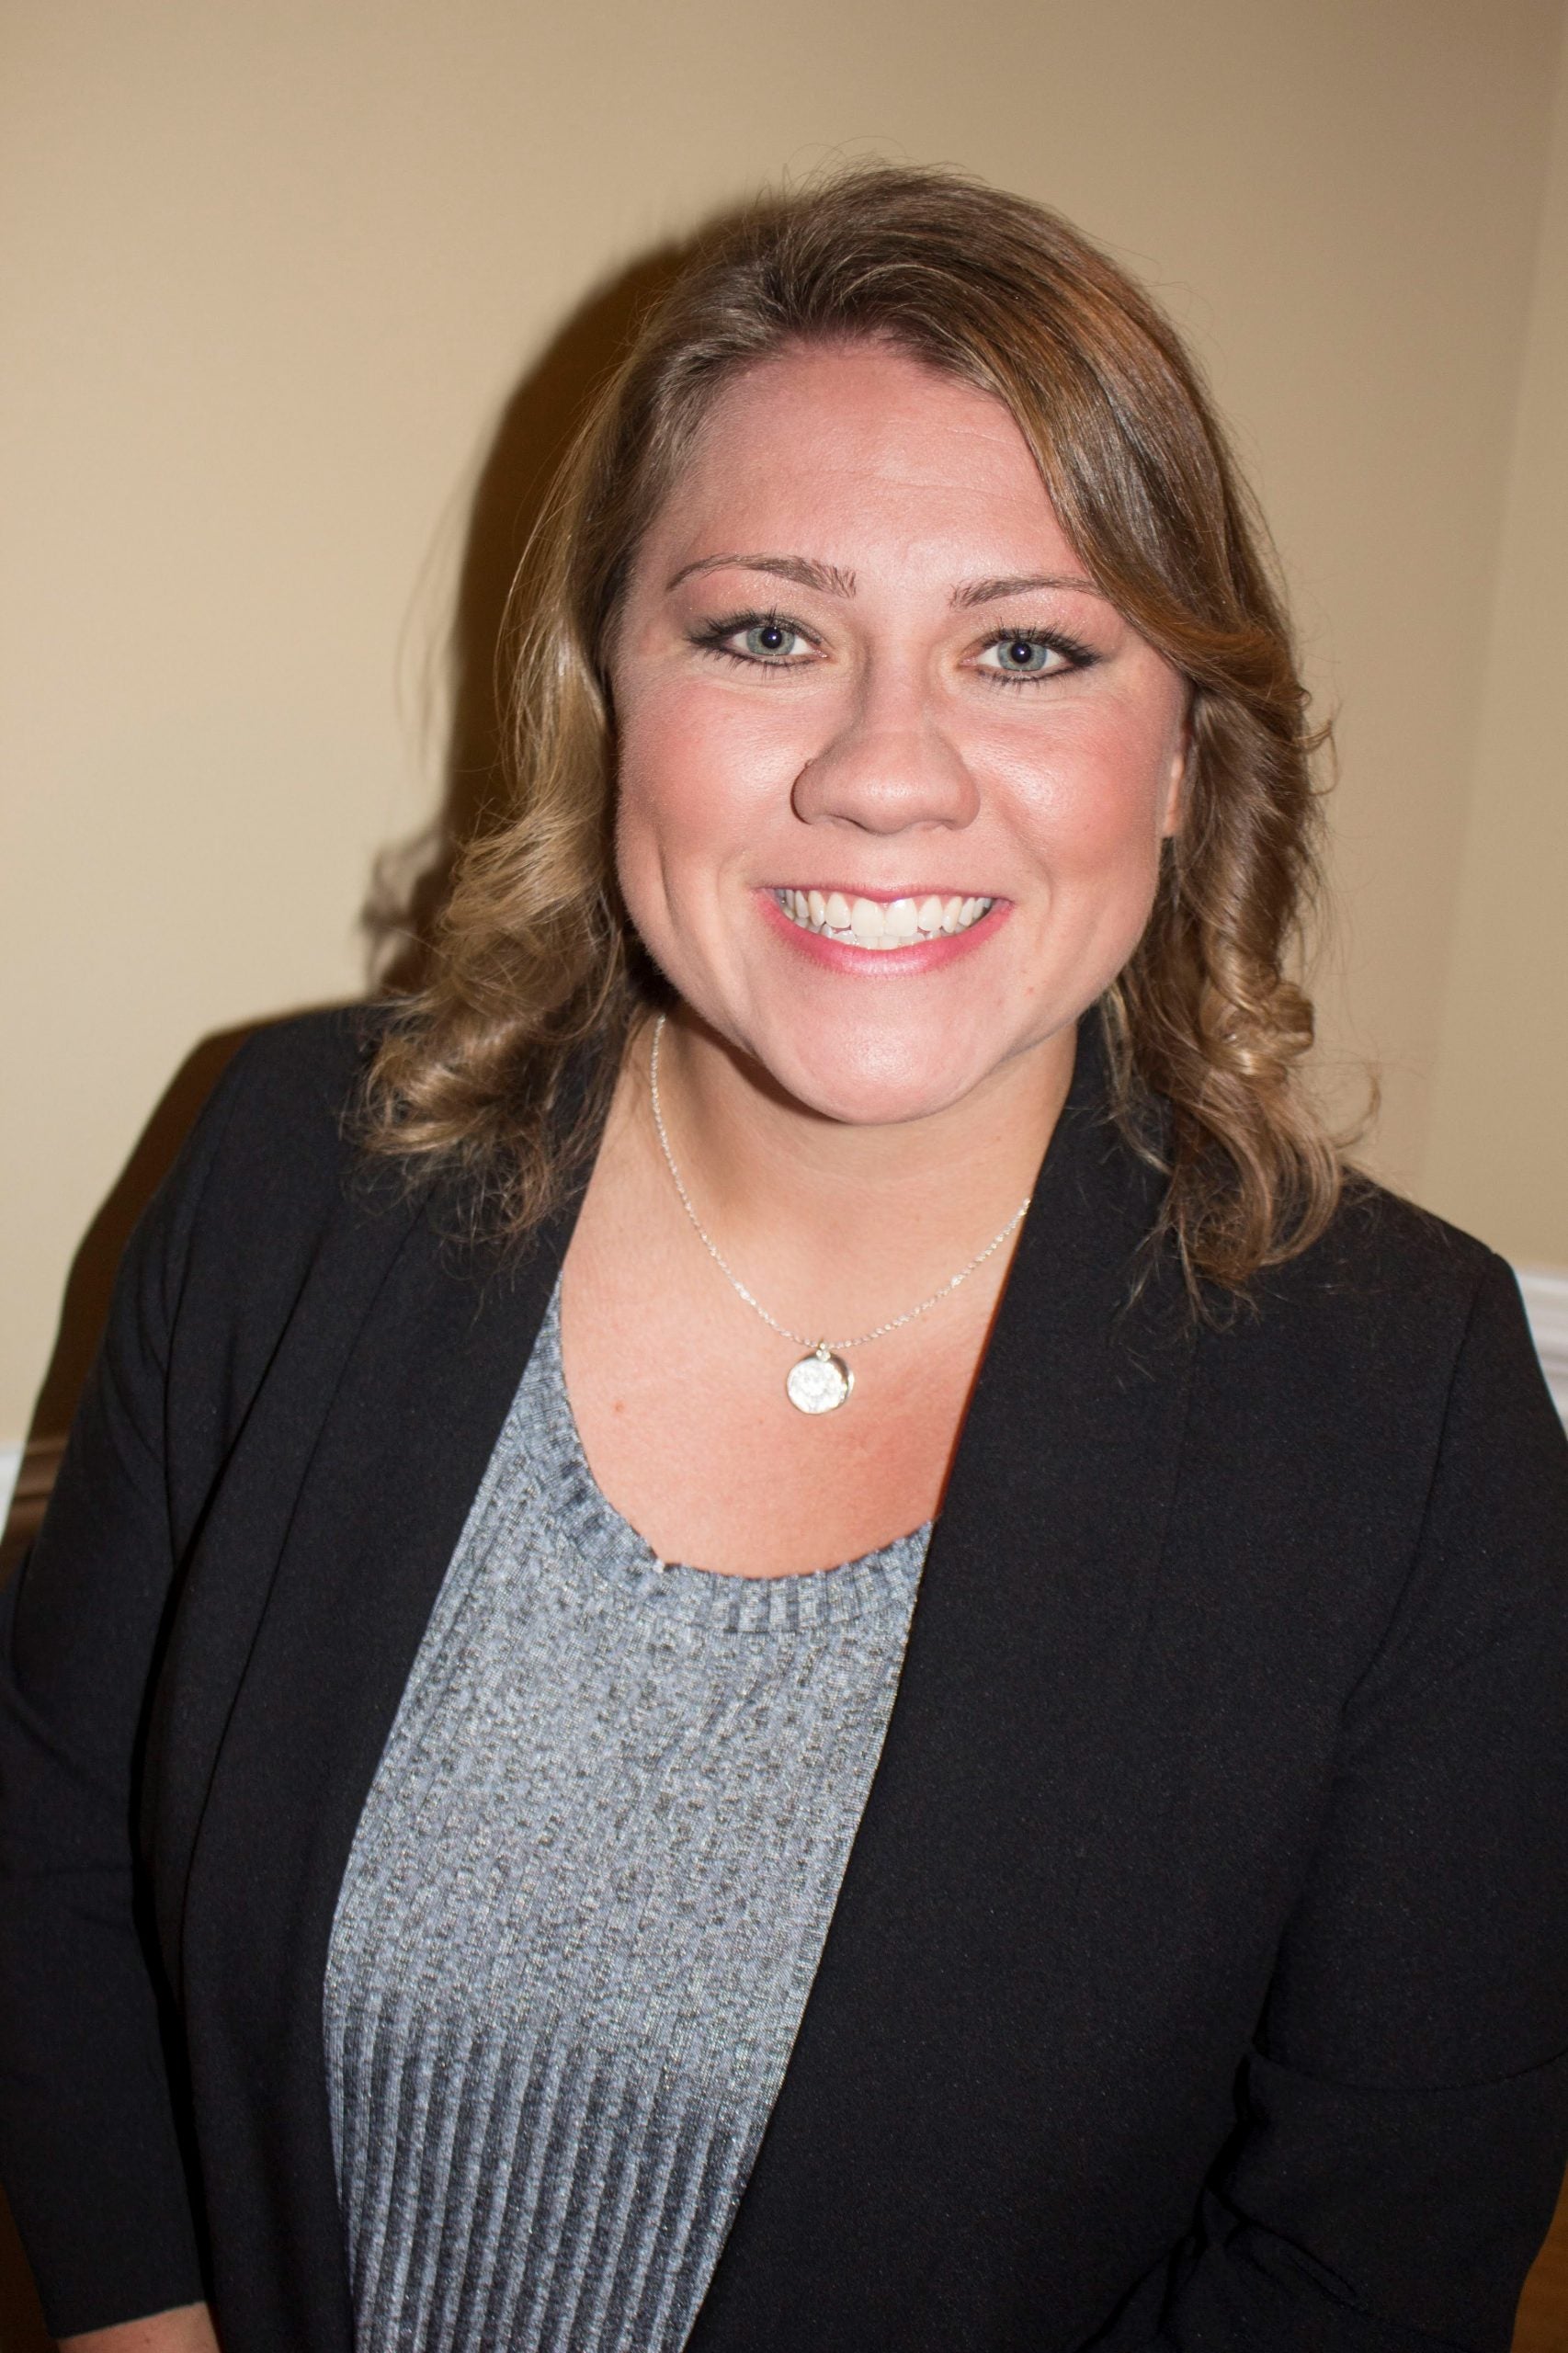 RISE29 program manager Tristyn Daughtry